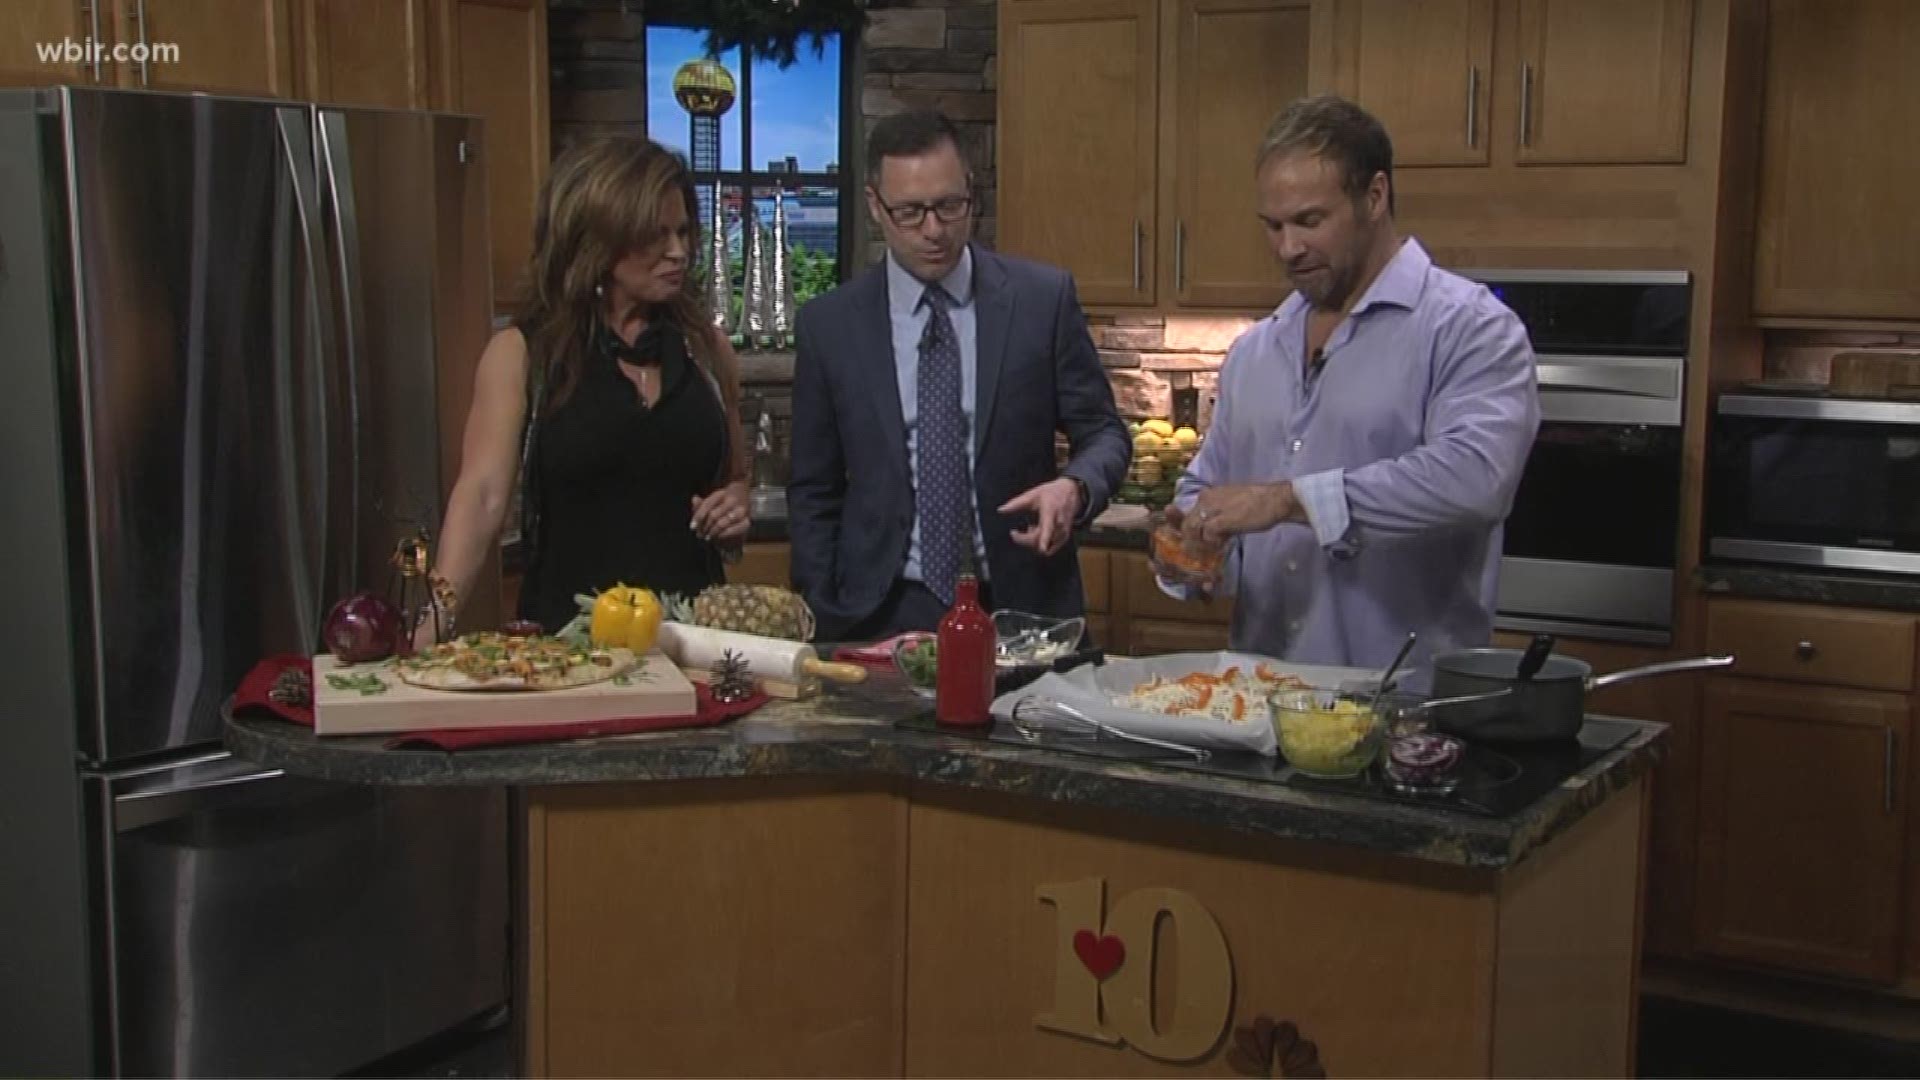 Scott and Michelle Williams from Totality Living Well are here to share their recipe for Pork Chop Pineapple Pizza.